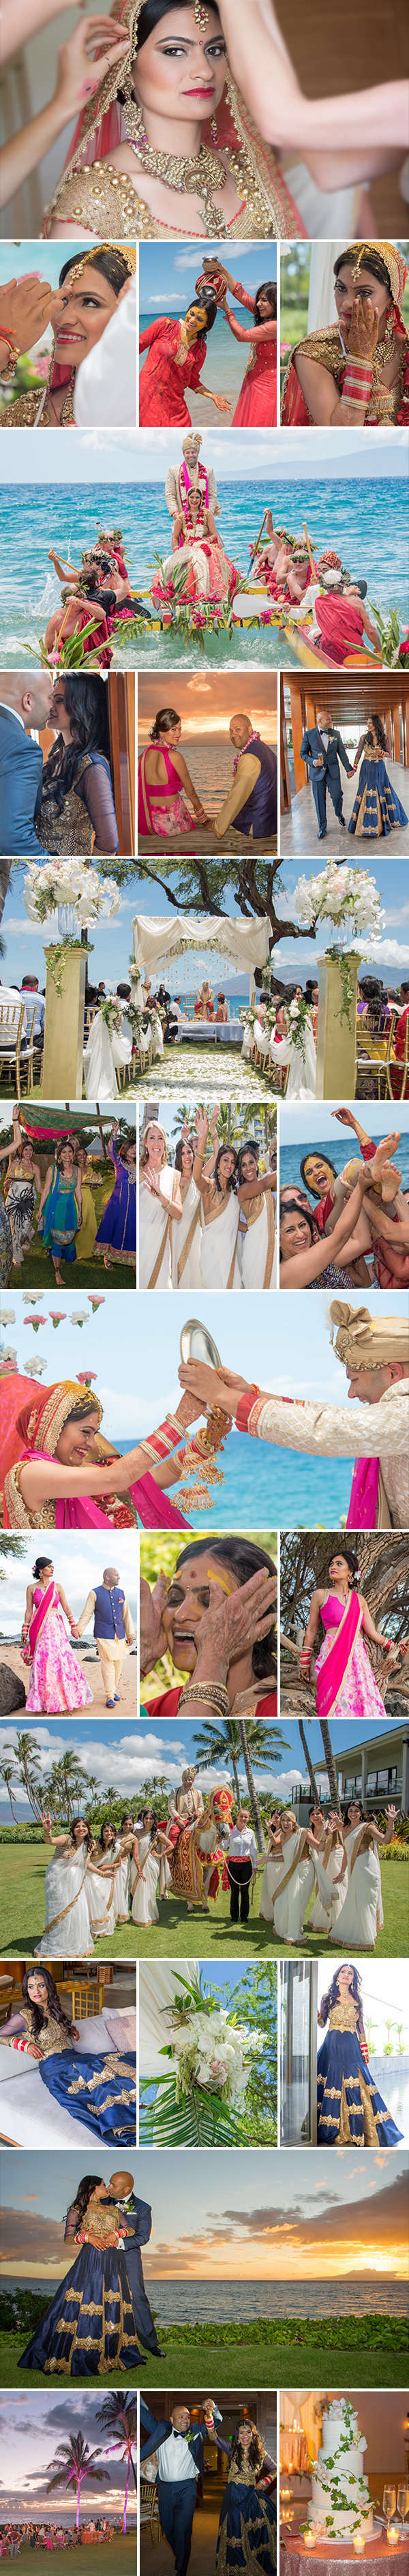 new indian wedding at Adnaz hotel on Maui (1)